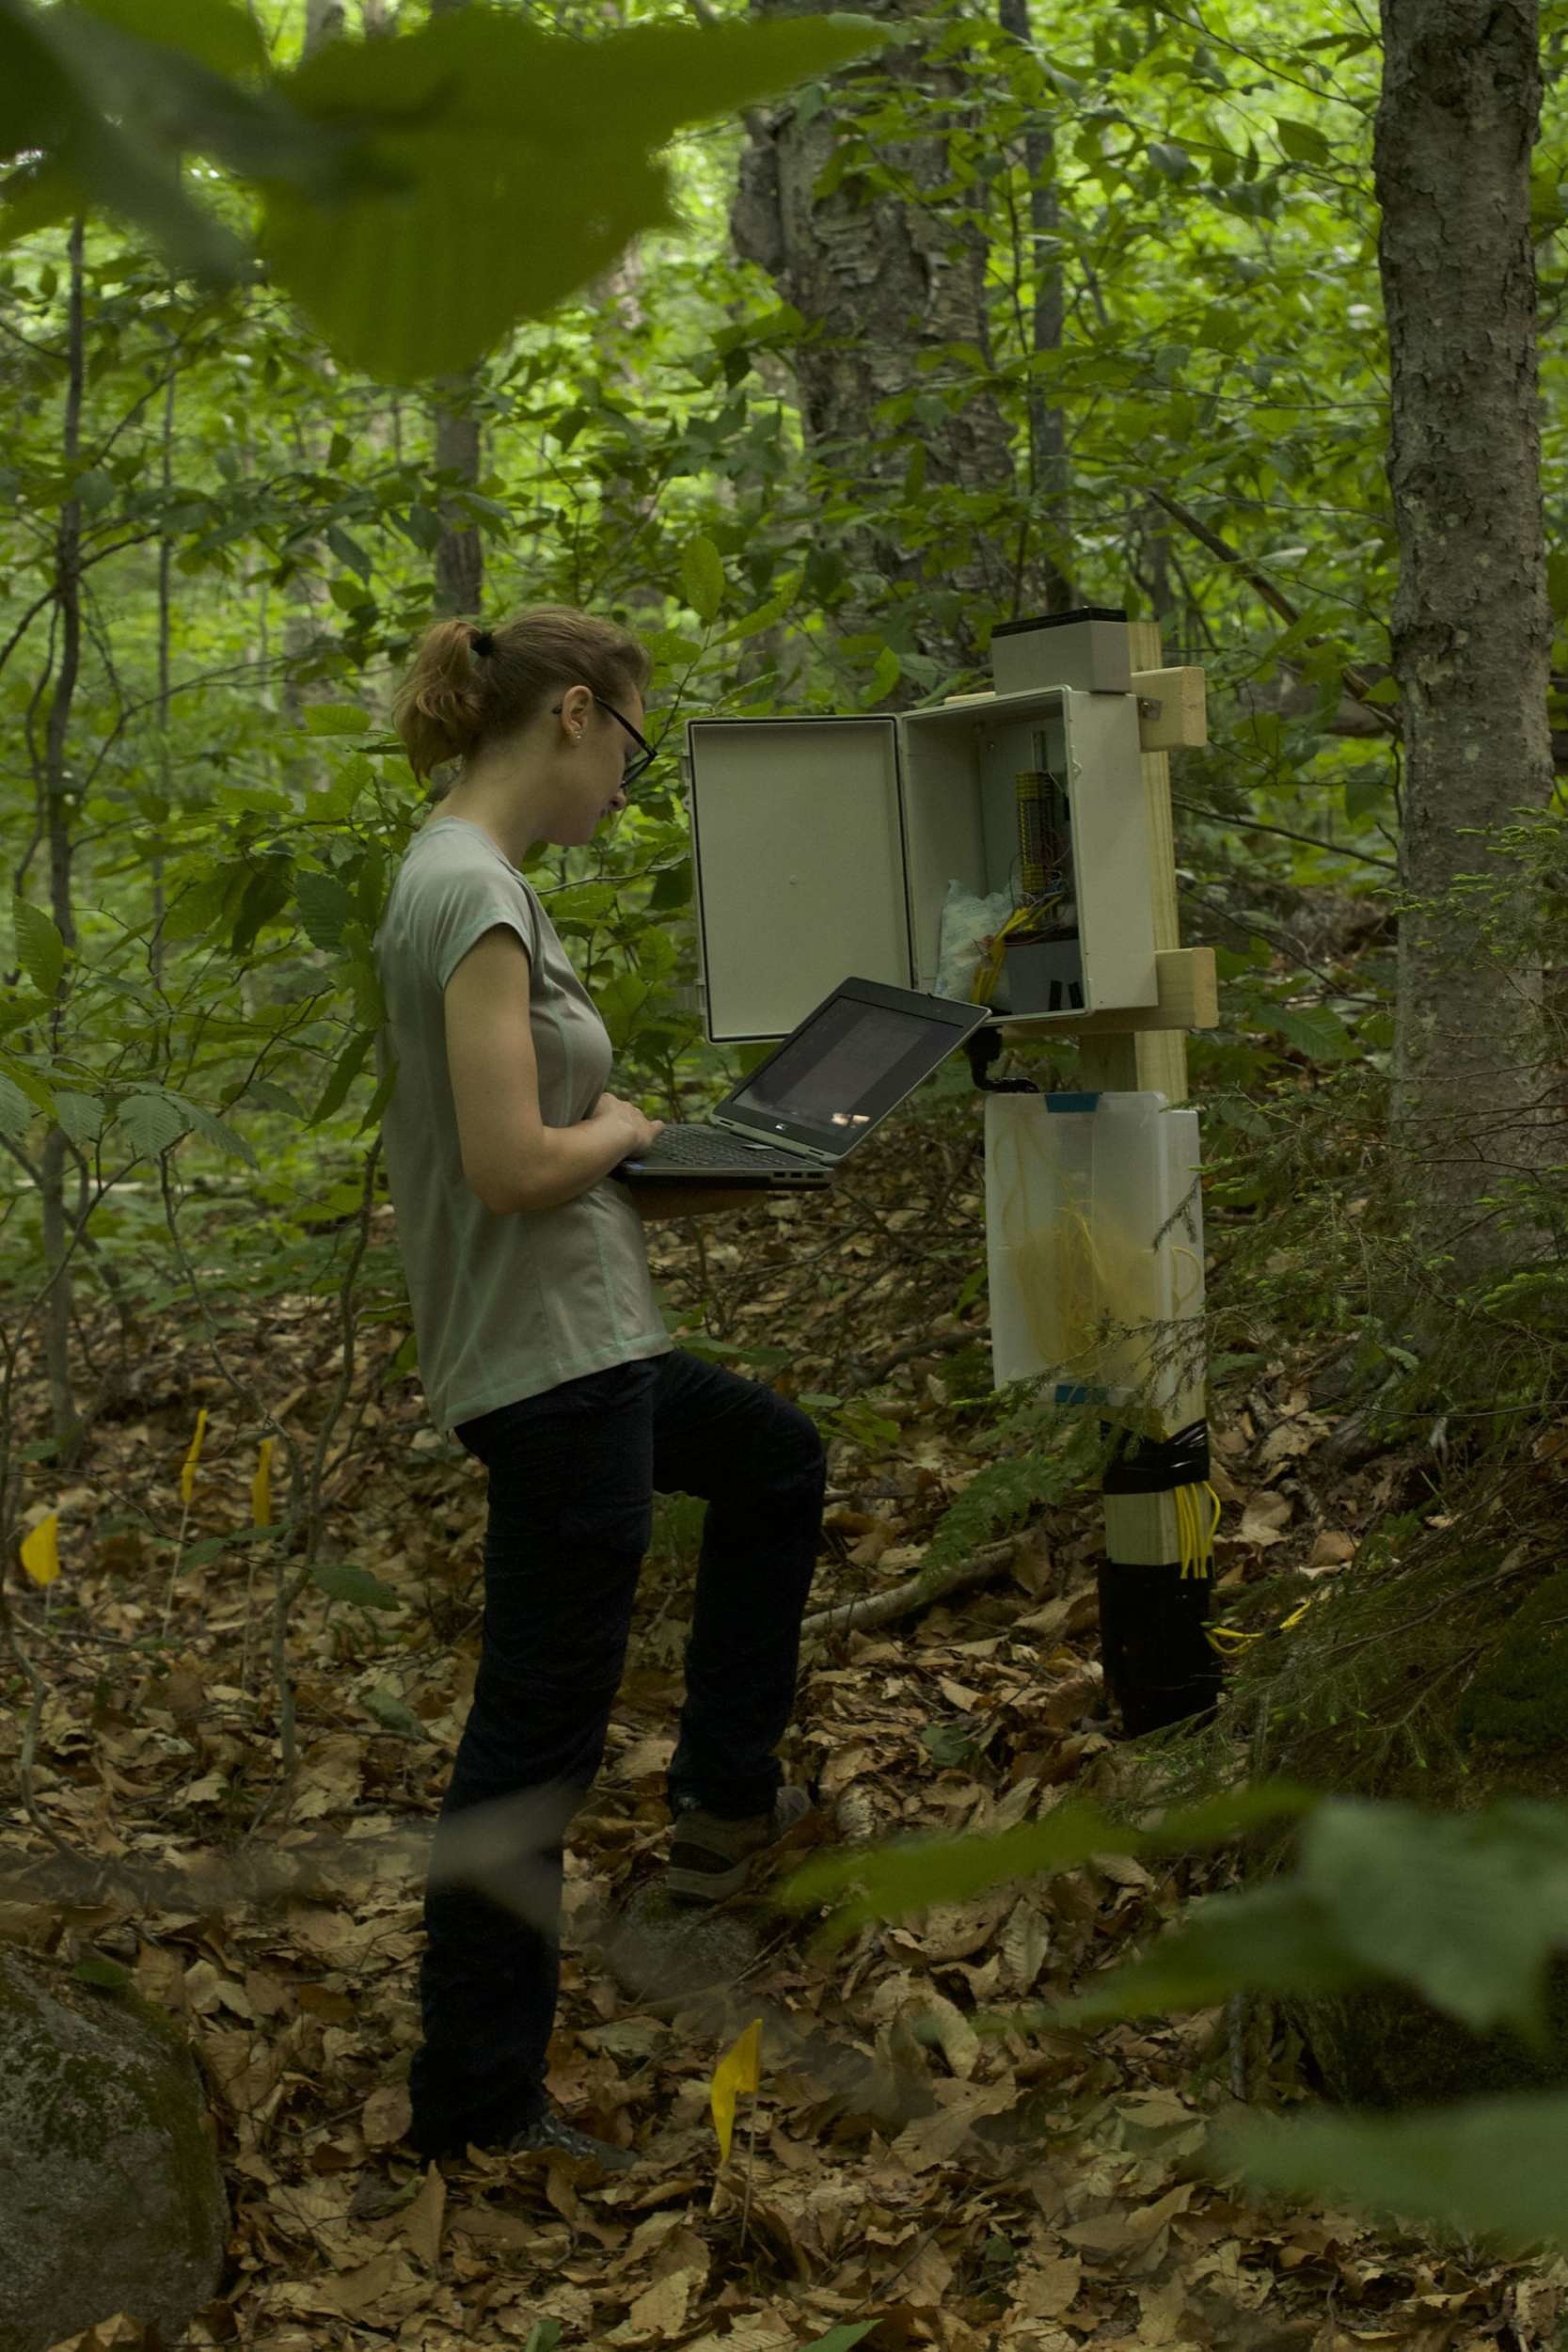 A researcher collects data in the Hubbard Brook Experimental Forest. (photo © Sophia Adams)